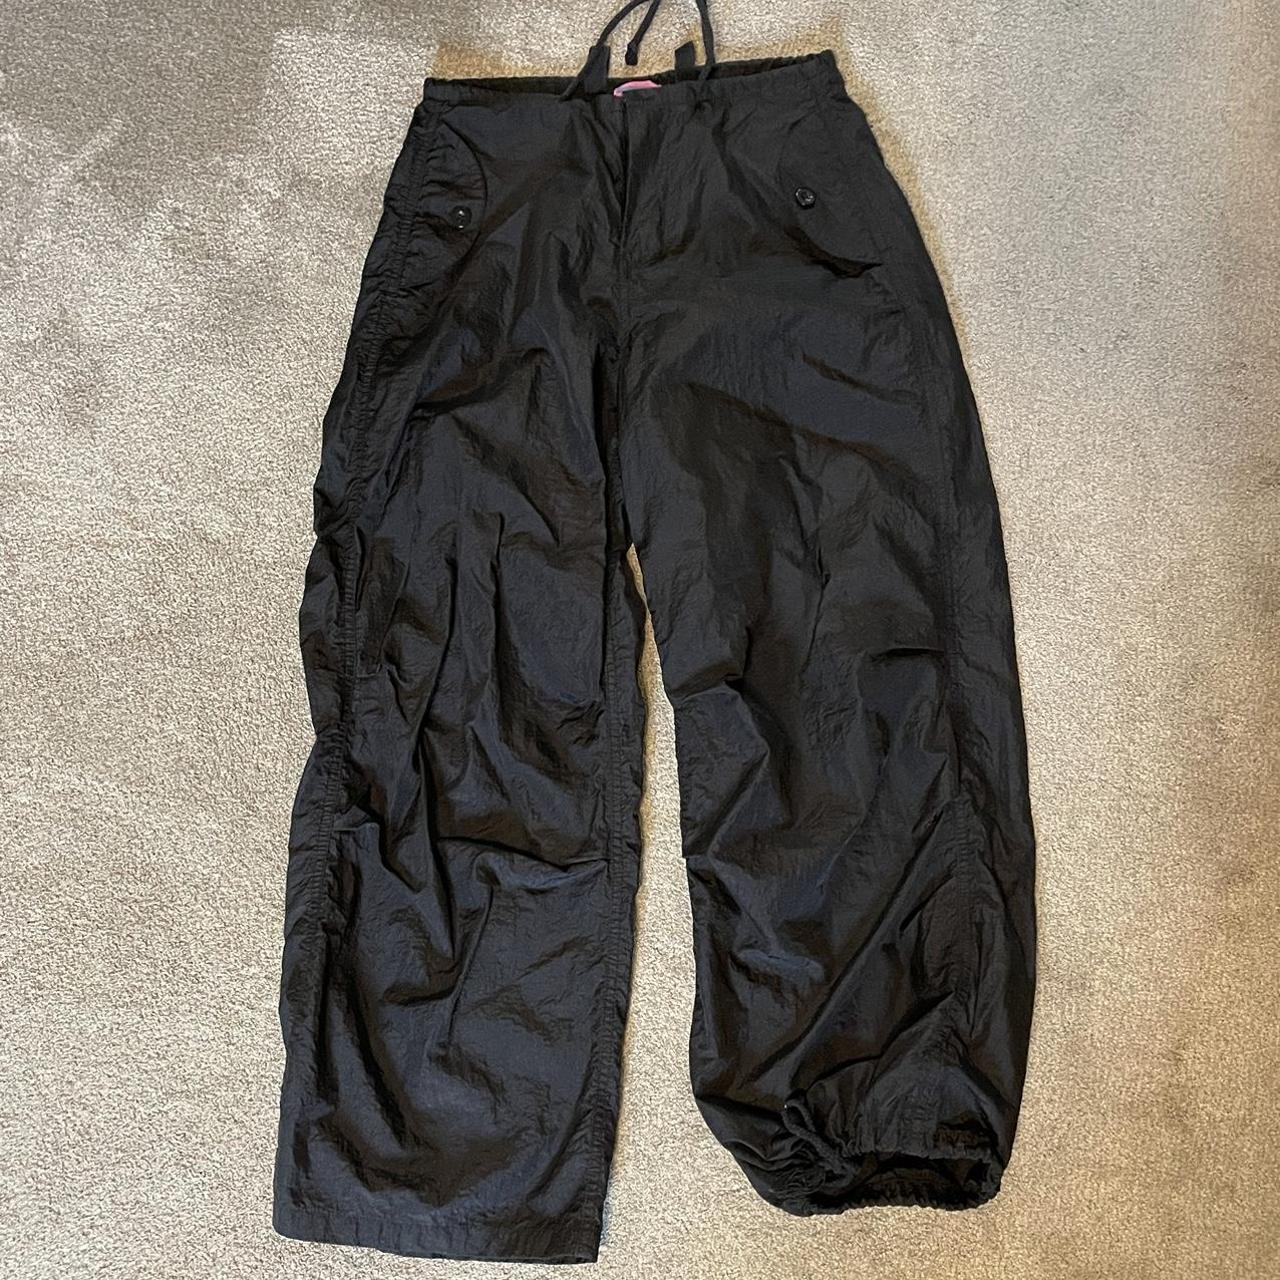 Edikted parachute pants String only in one of the... - Depop